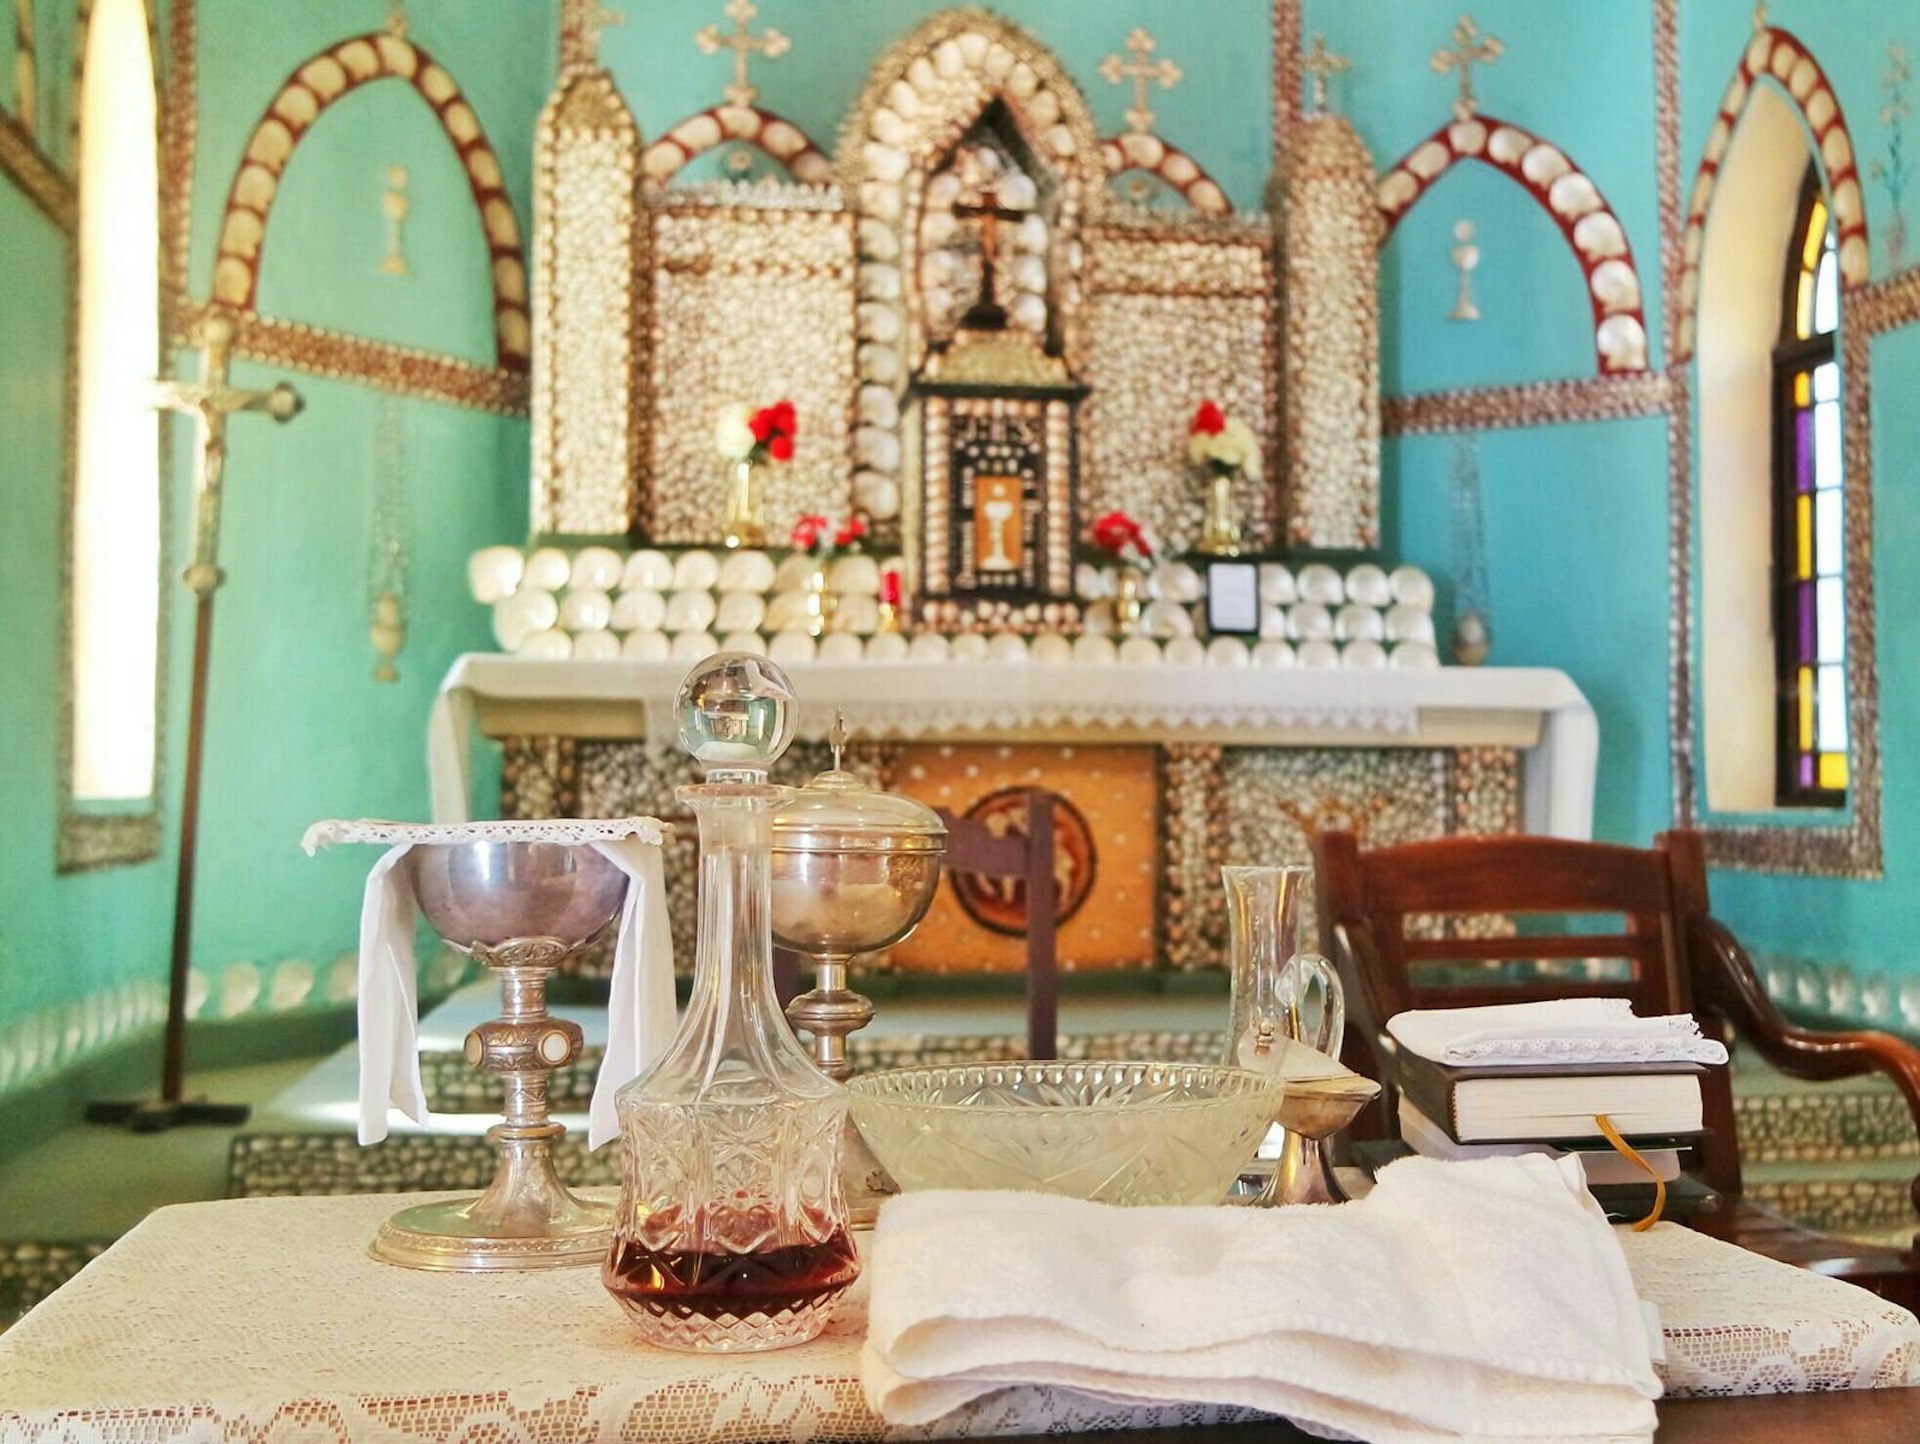 Church interior with chalice, bible and wine decanter in the foreground, altar decorated with shells in the background and bright teal walls.